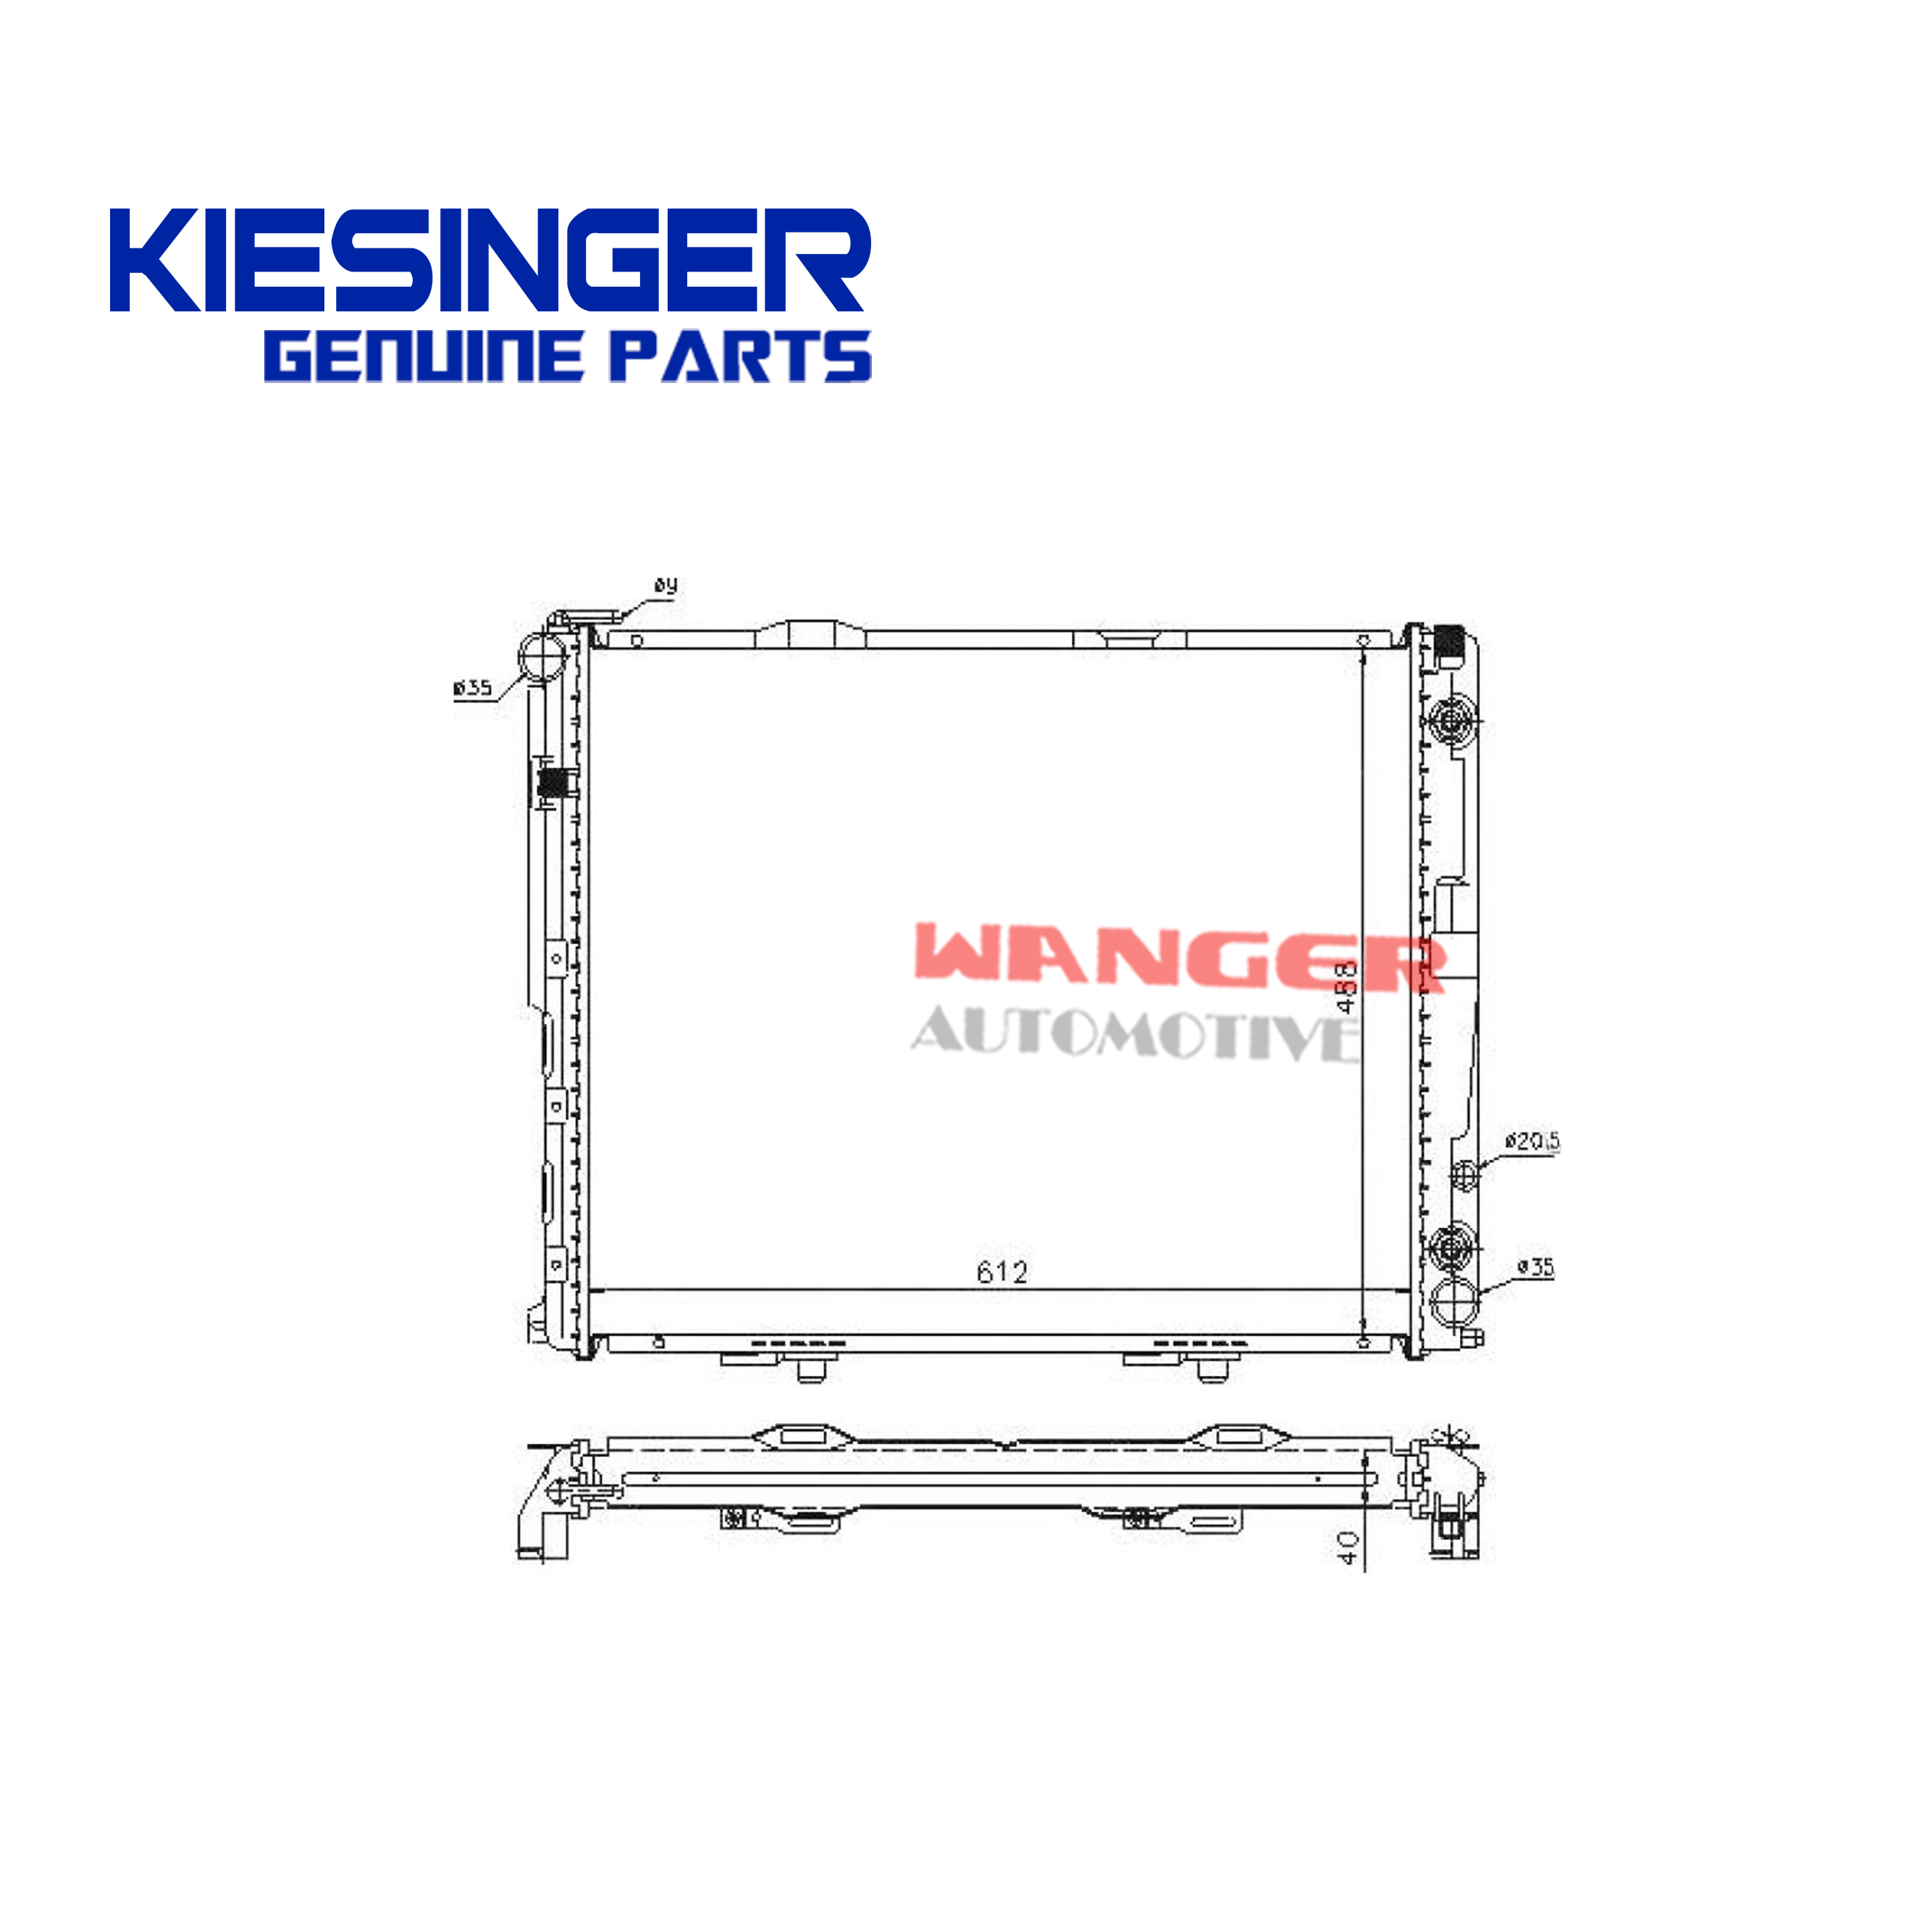 Details about   For Mercedes W124 300D 300TD Nissens Radiator 124 500 00 02 New 